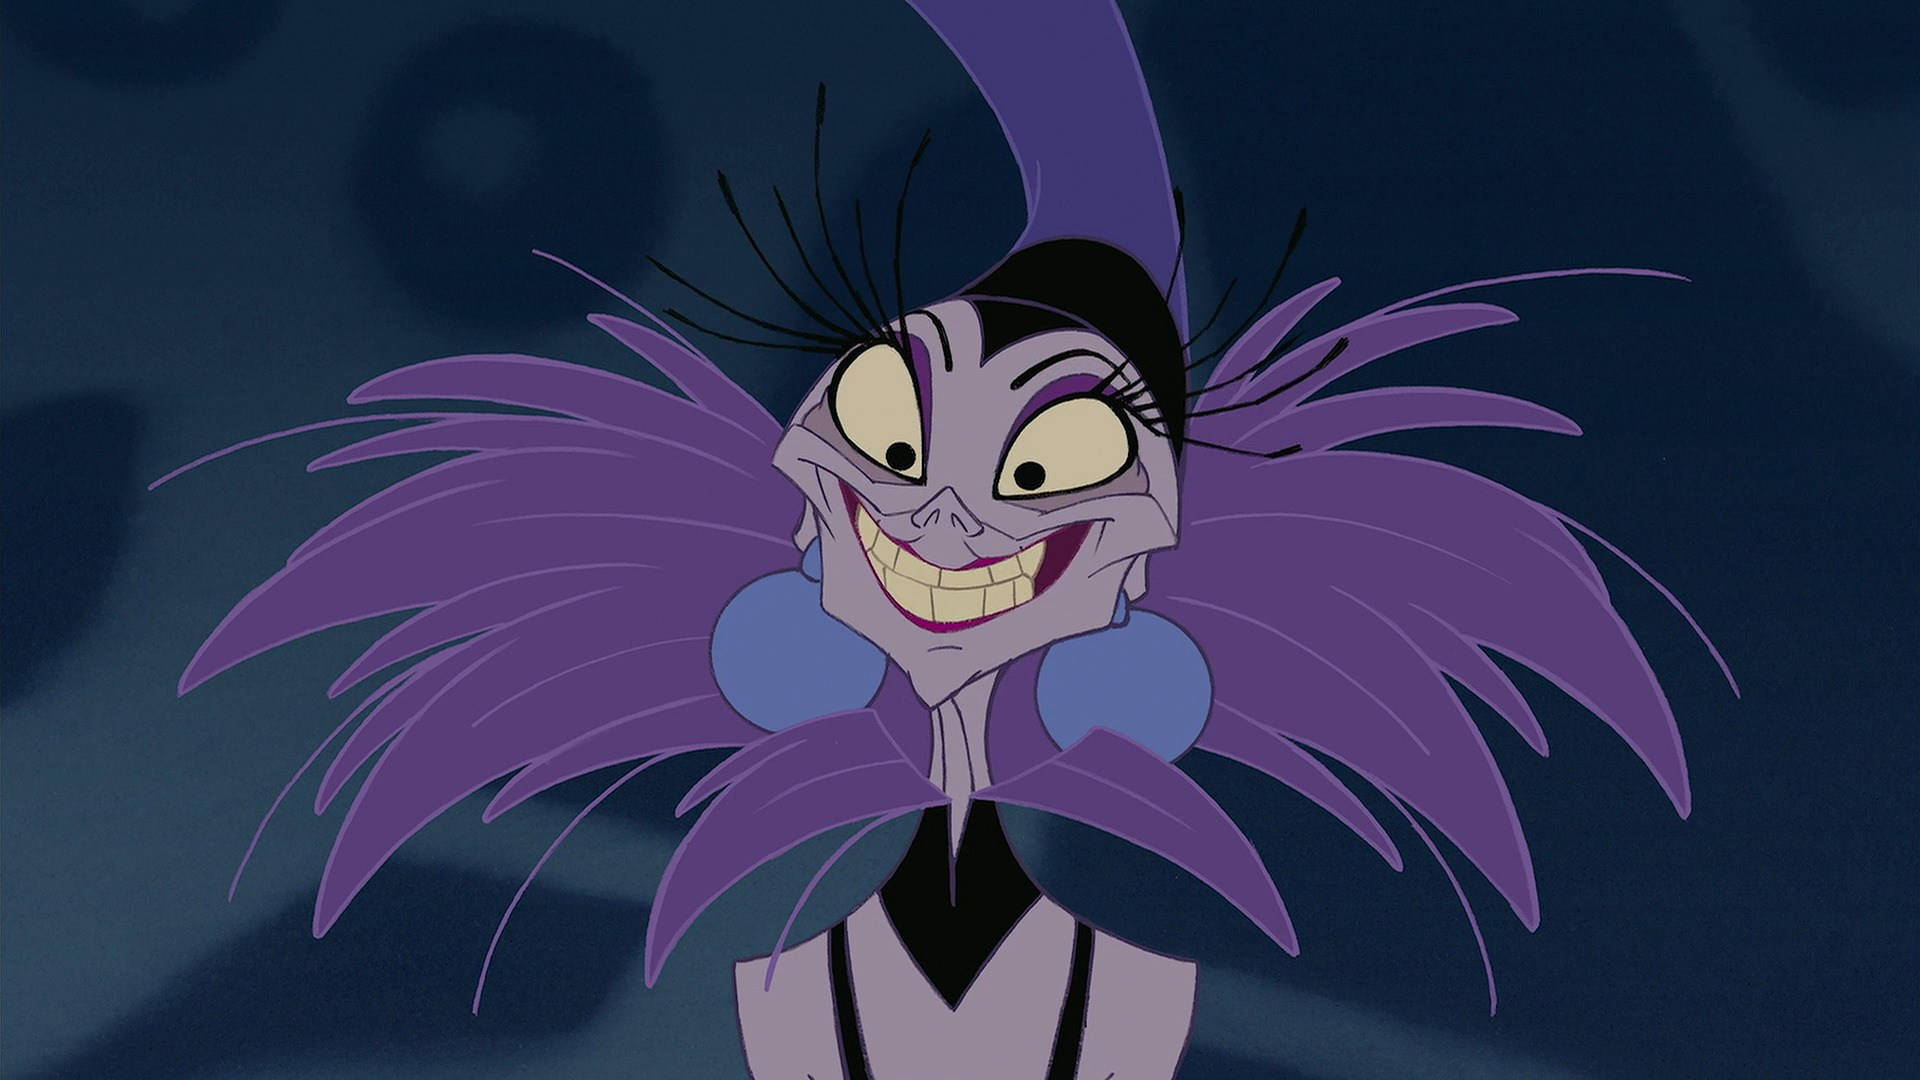 Funny Yzma The Emperors New Groove Wallpaper